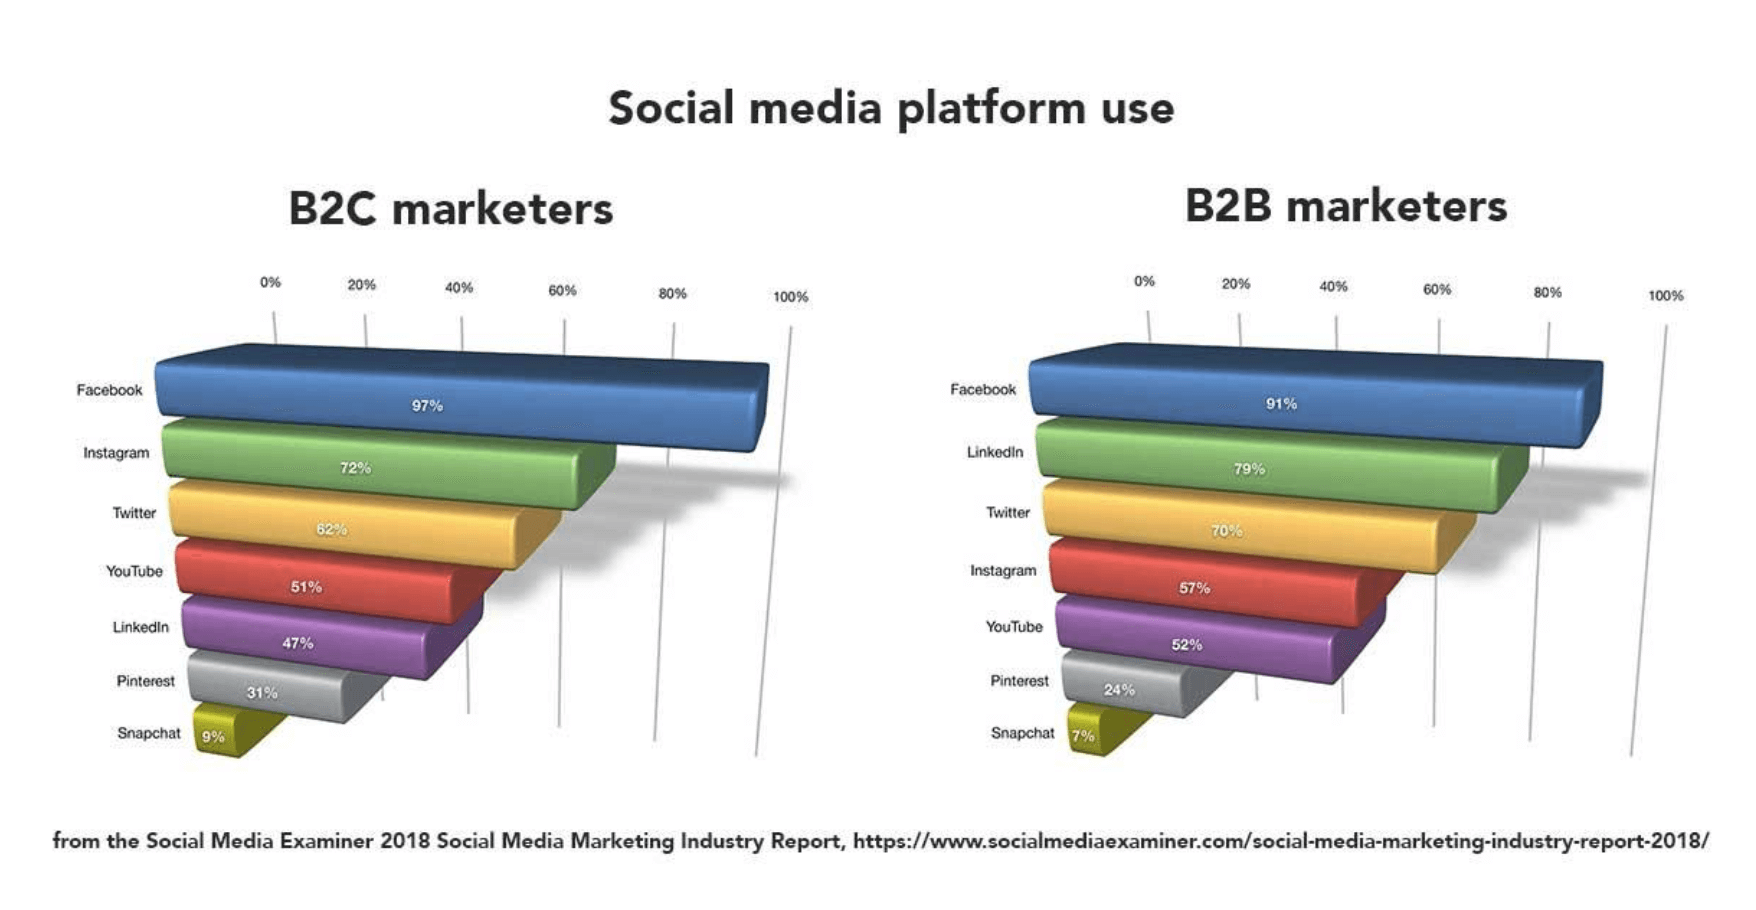 How do B2C and B2B marketers use social media platforms?